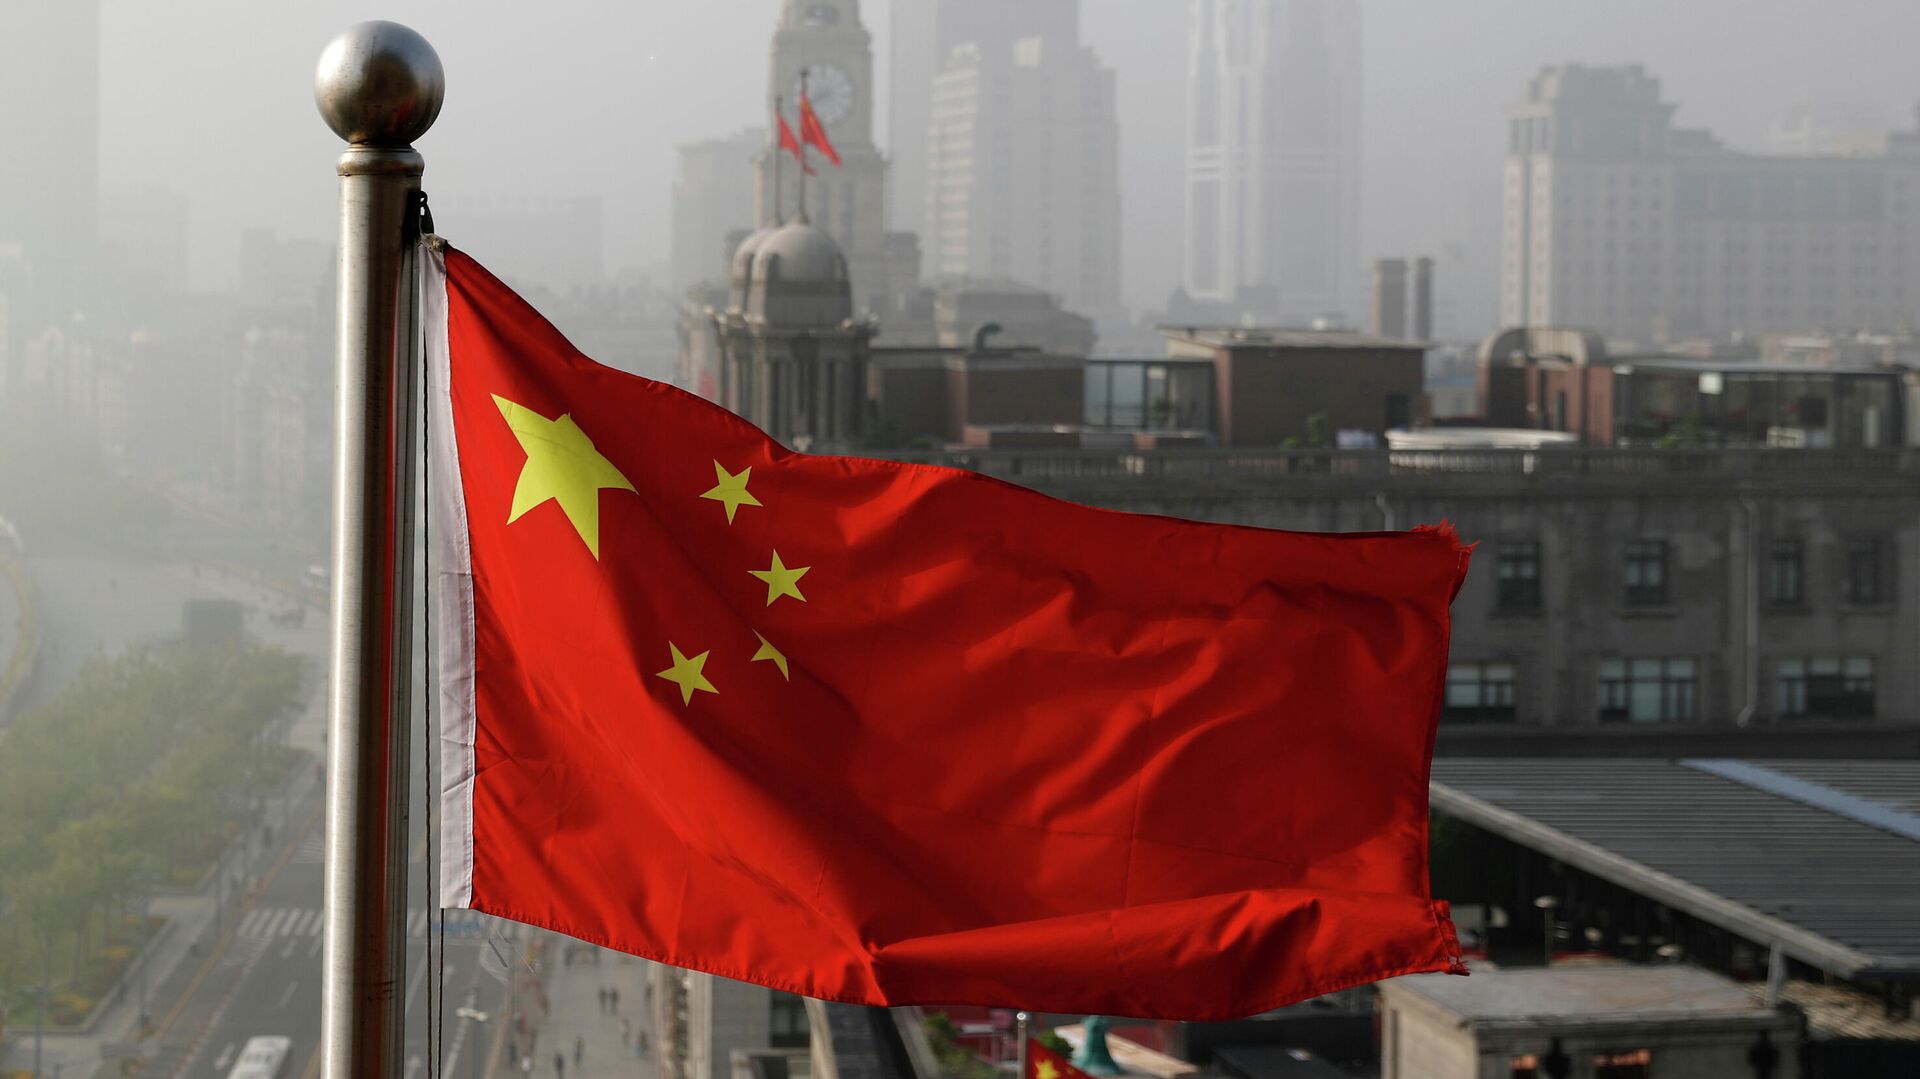 In this April 14, 2016 file photo, a Chinese national flag flutters against the office buildings in Shanghai, China.  - Sputnik International, 1920, 22.06.2022